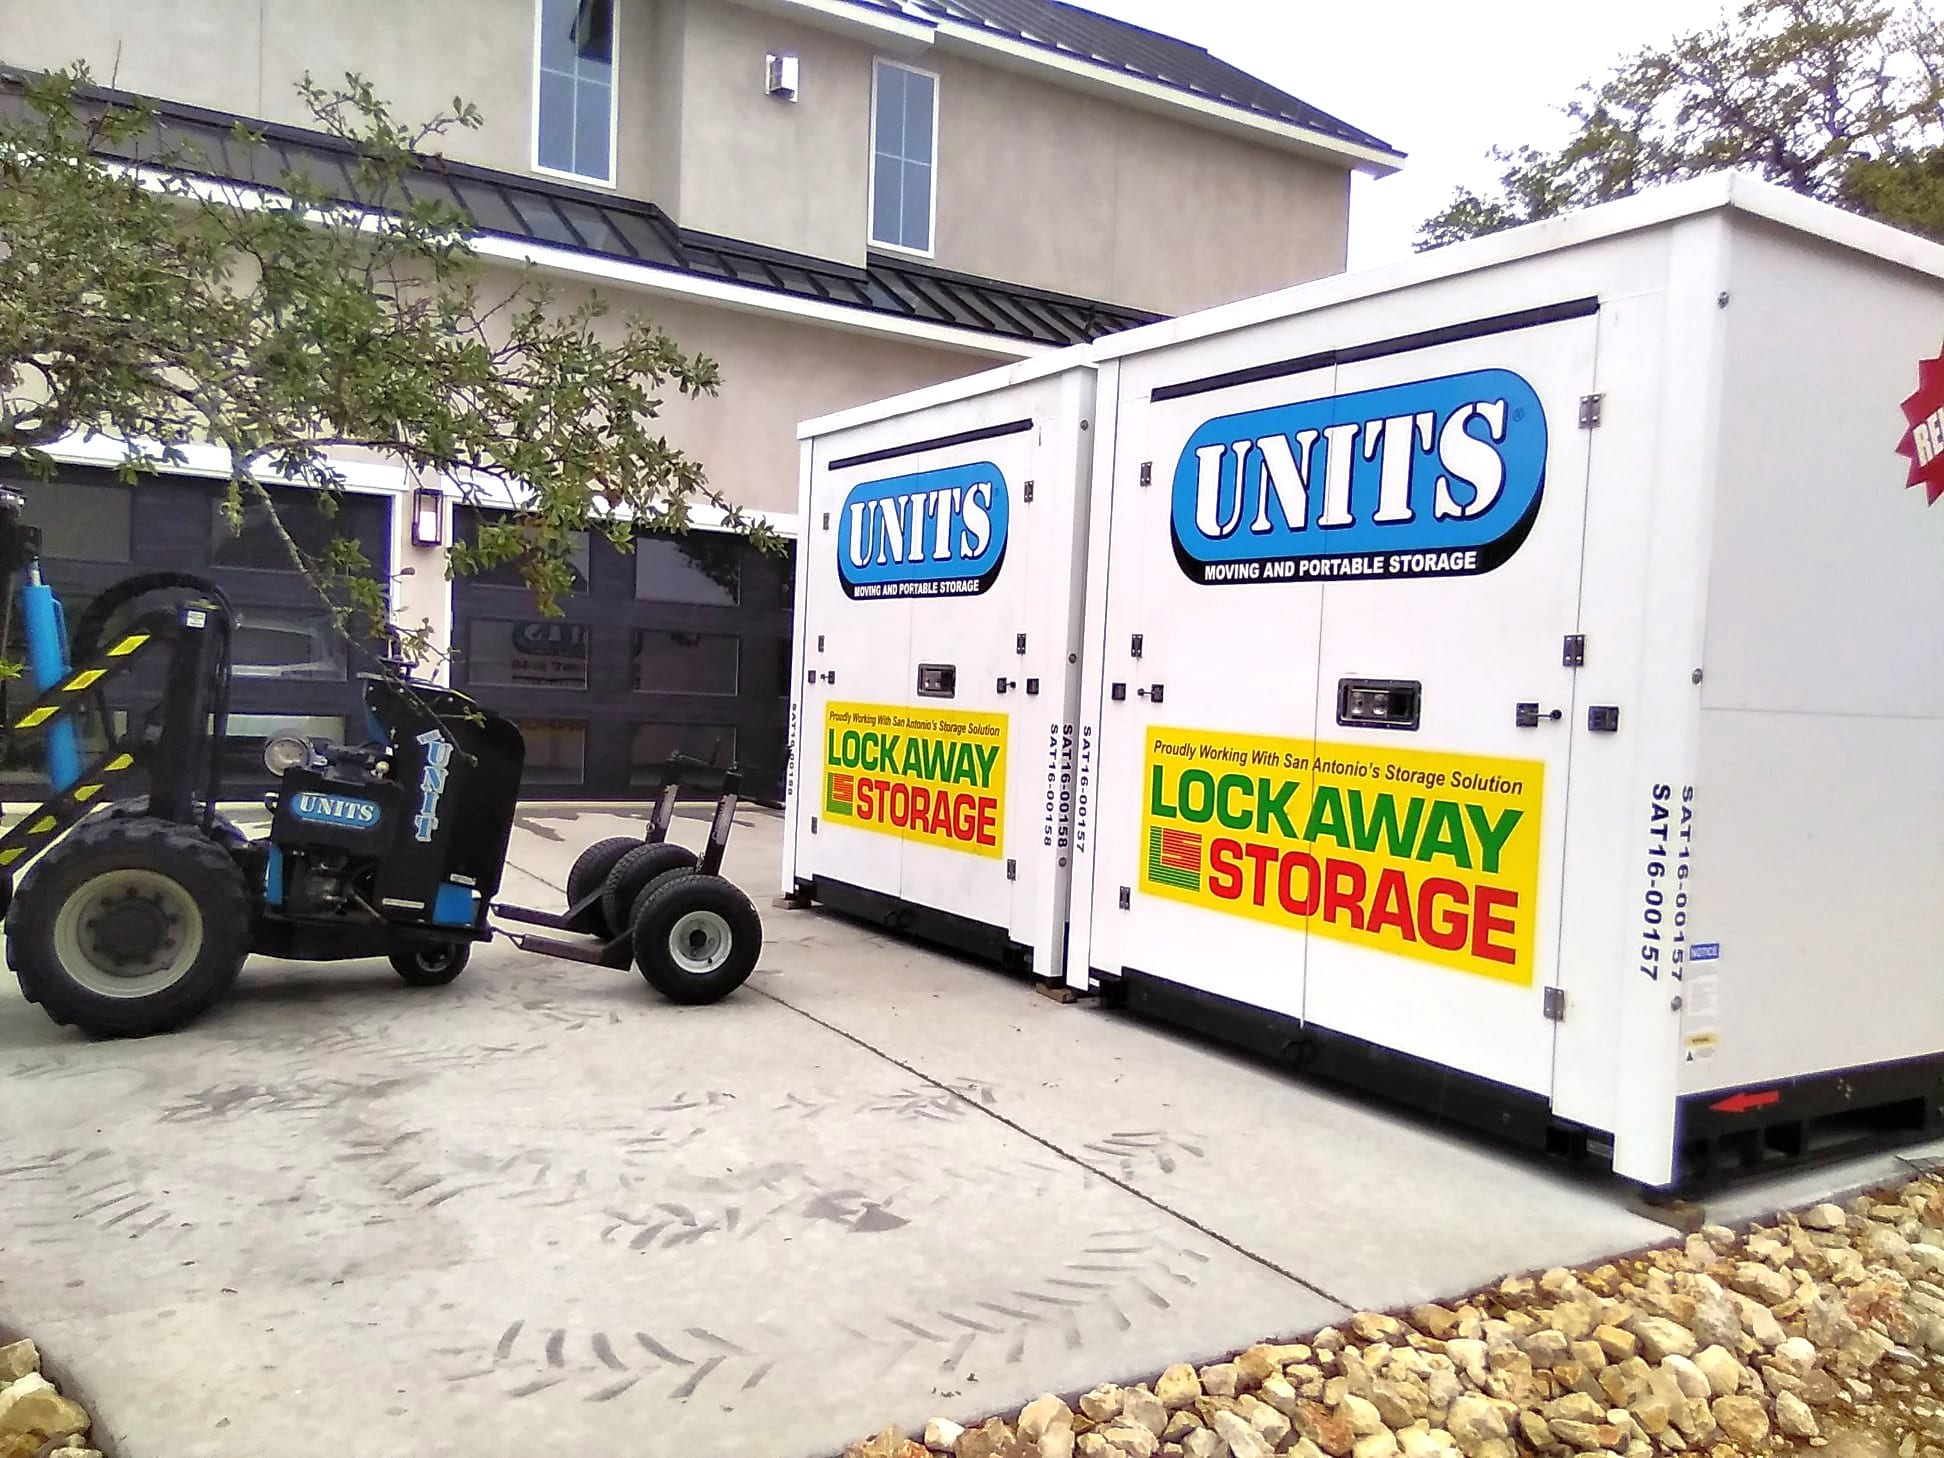 UNITS Moving and Portable Storage of San Antonio containers in a driveway.